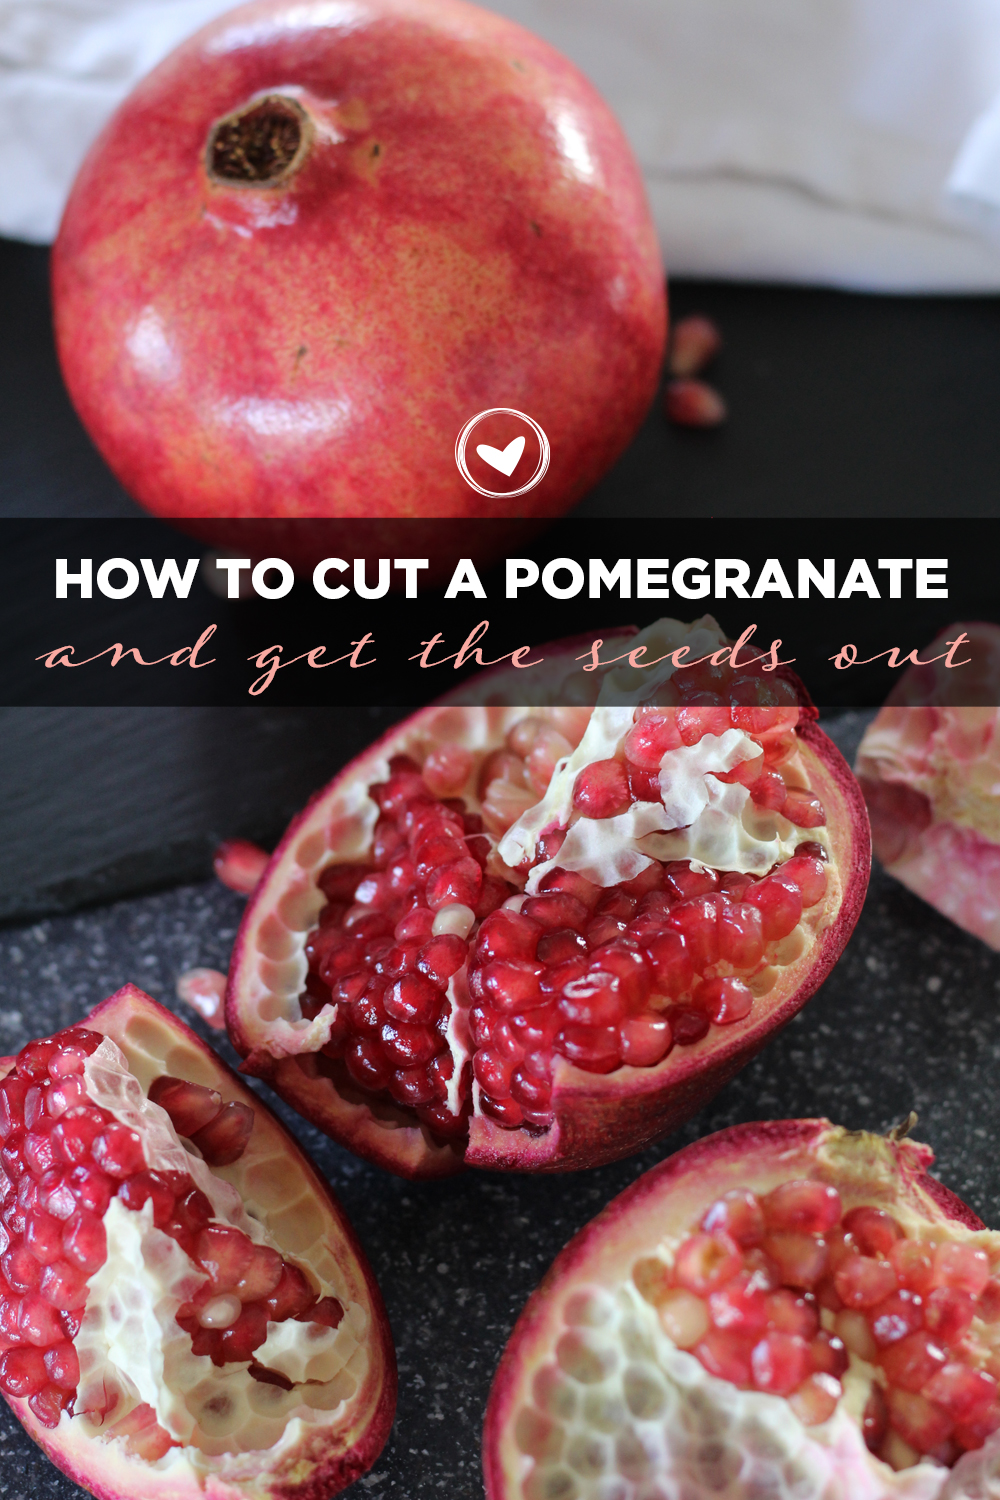 How to Cut a Pomegranate and Get the Seeds Out